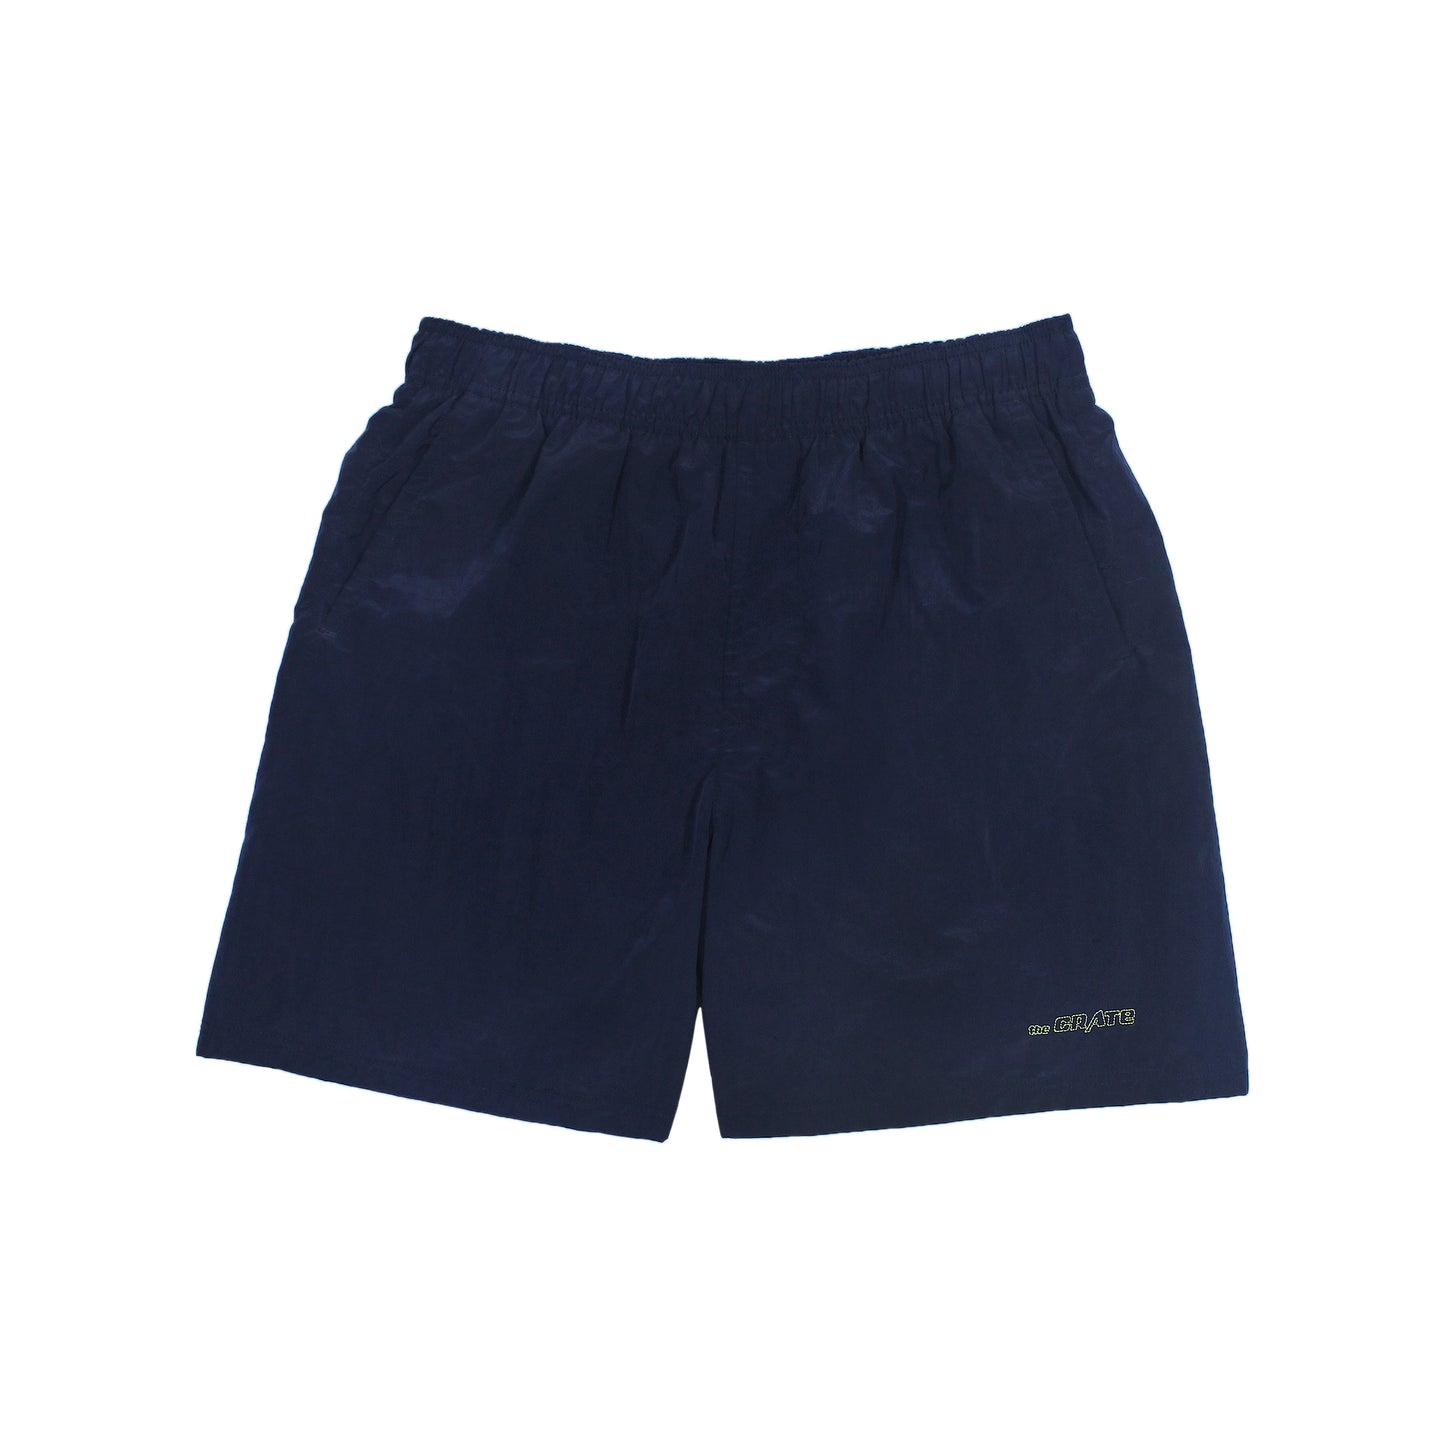 the CRATE Sport Shorts Navy